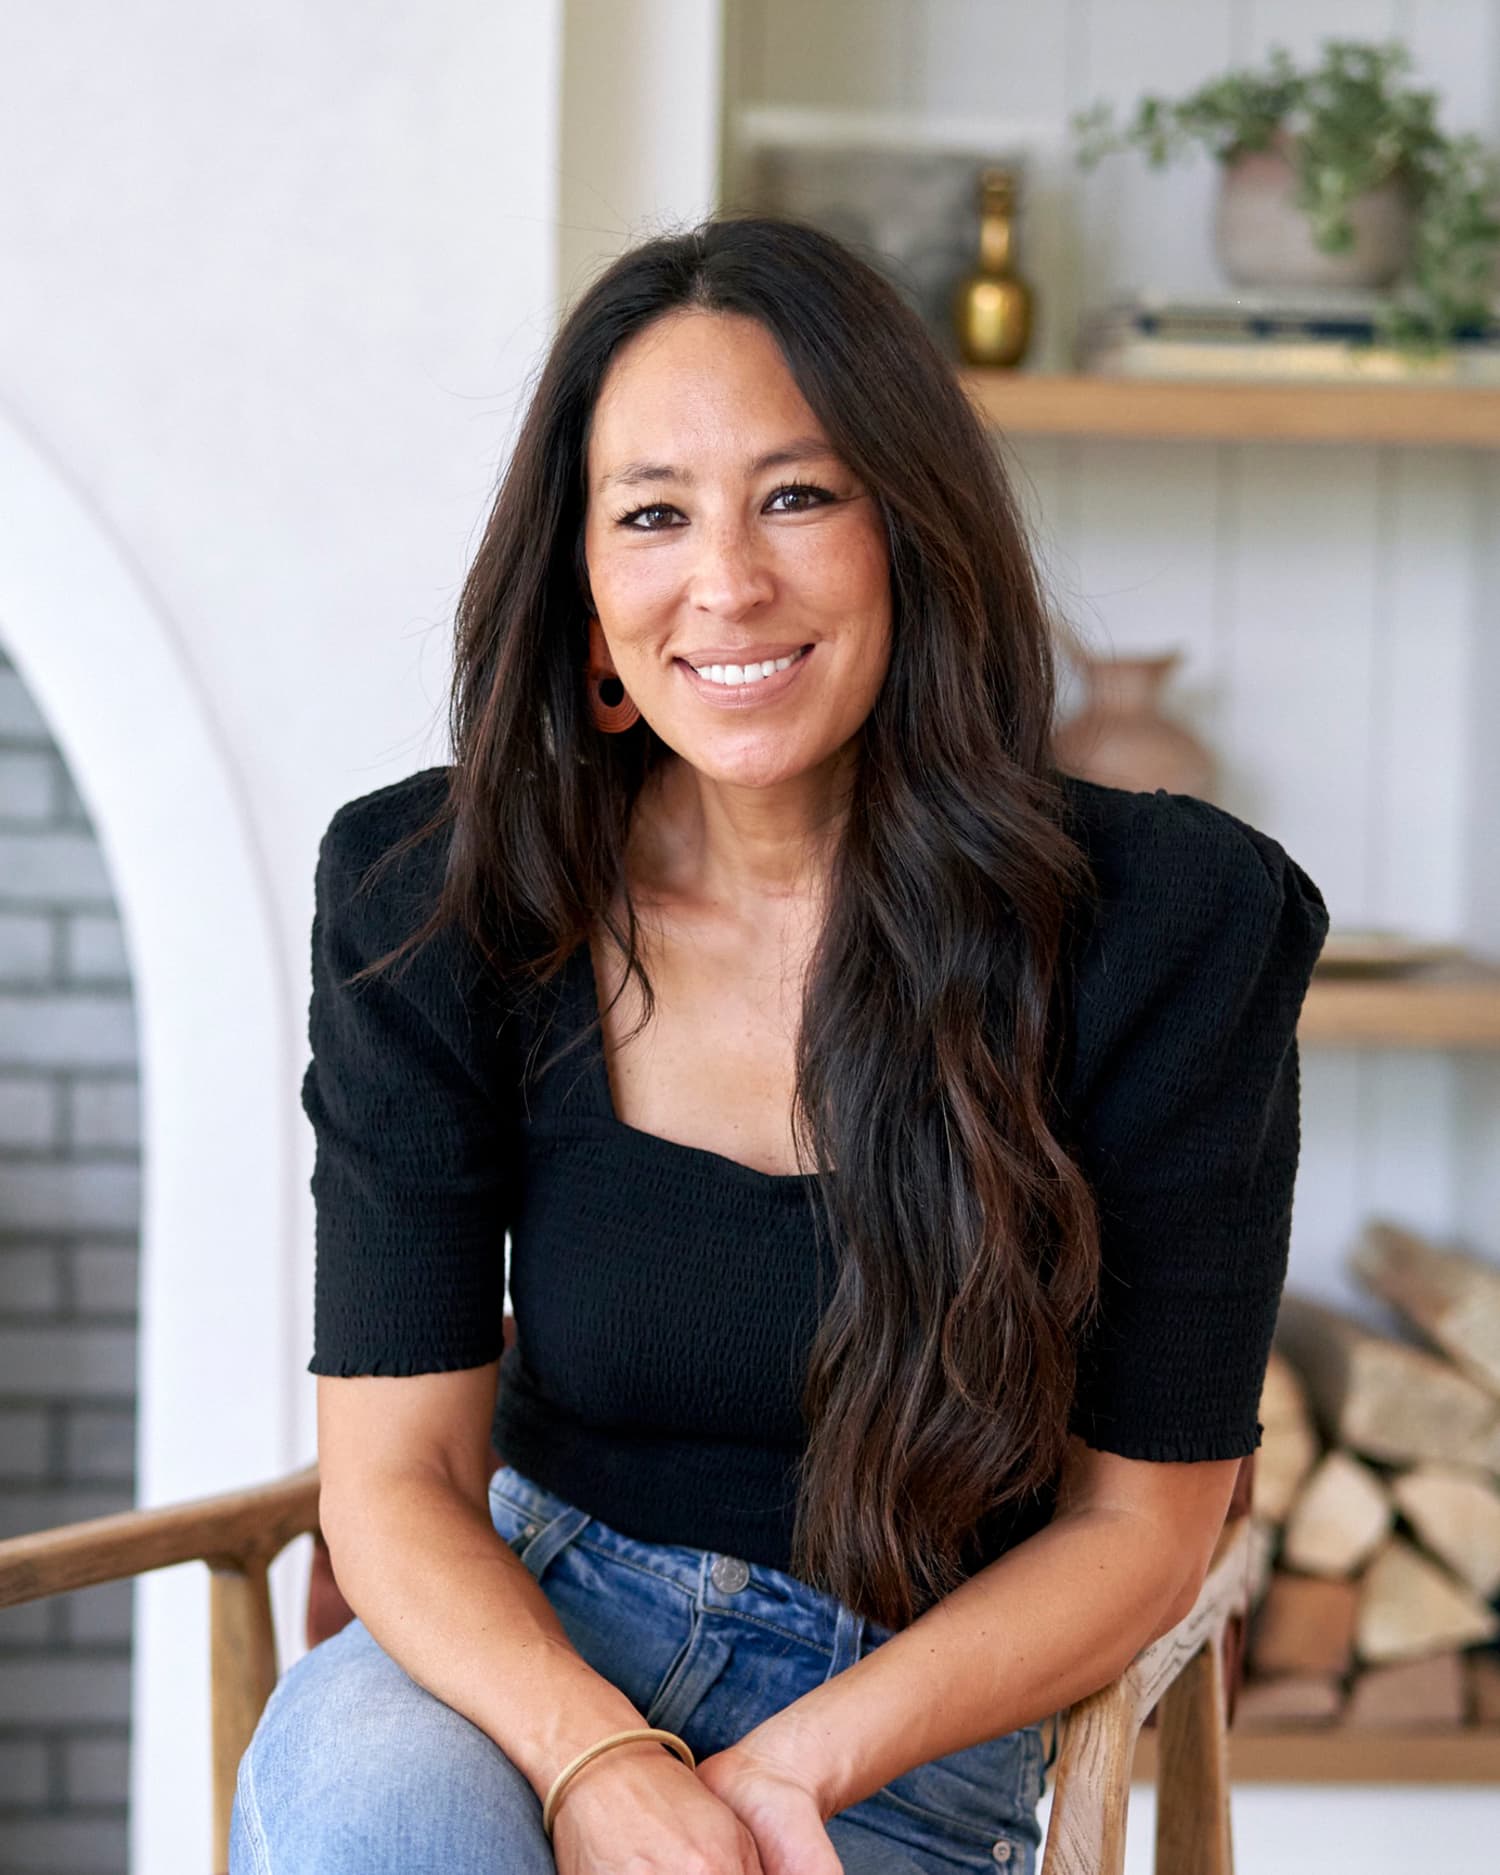 Joanna Gaines’ Son Crew Helping Her Make Pasta Sauce Is the Cutest Thing You’ll See Today